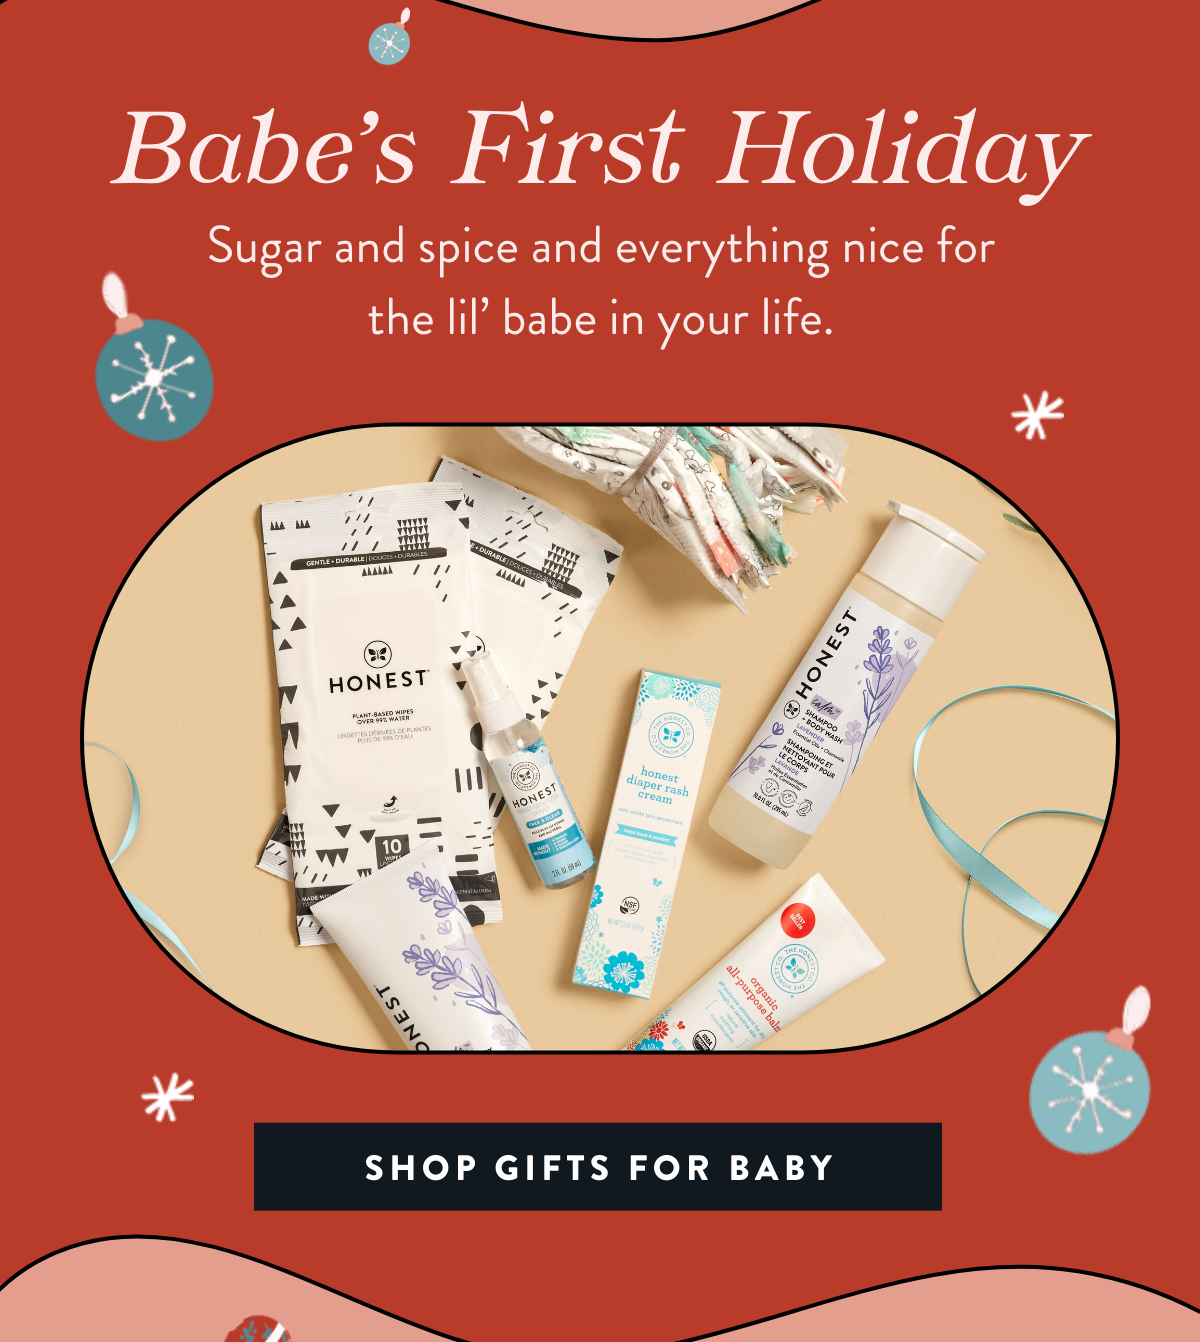 Shop Gifts for Baby